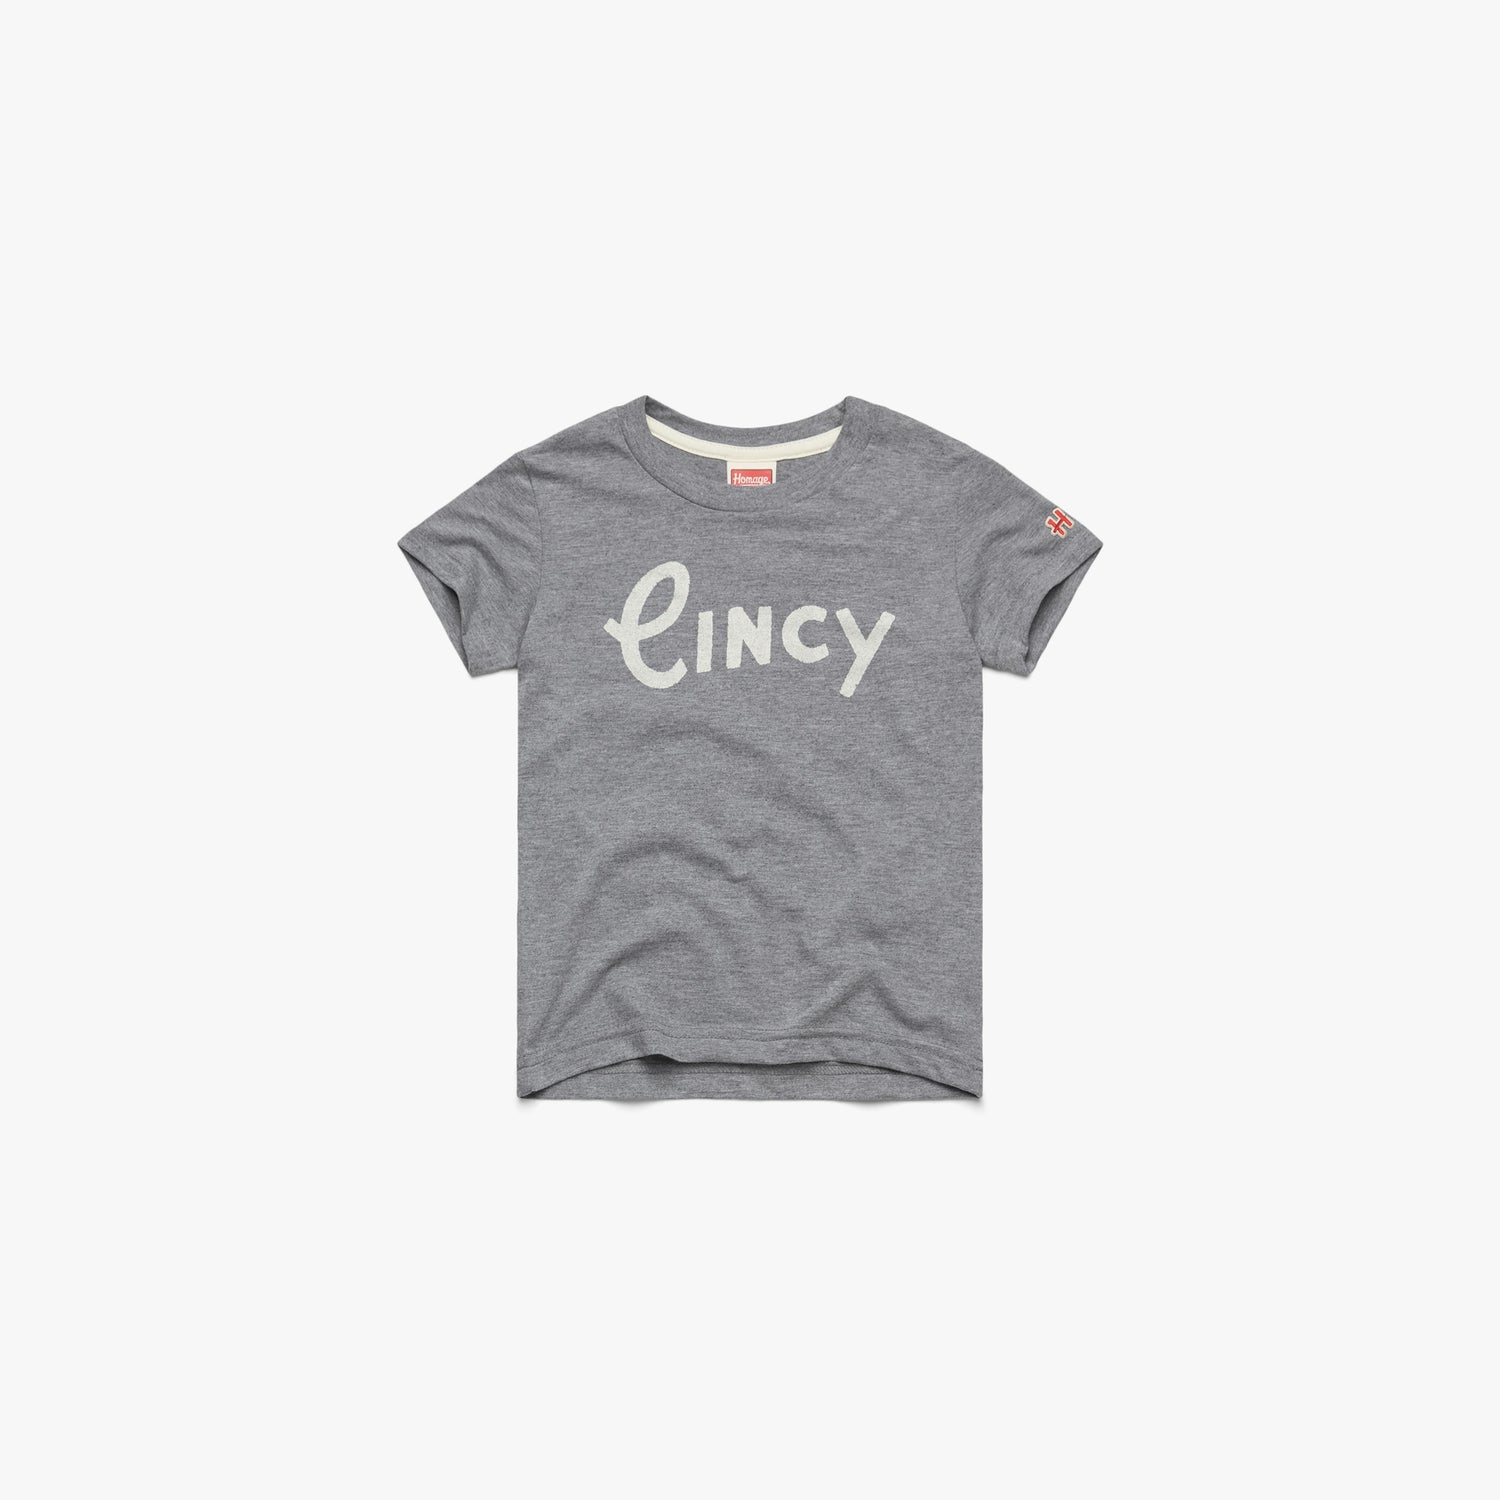 Cincy T-Shirt from Homage. | Royal Blue | Vintage Apparel from Homage.